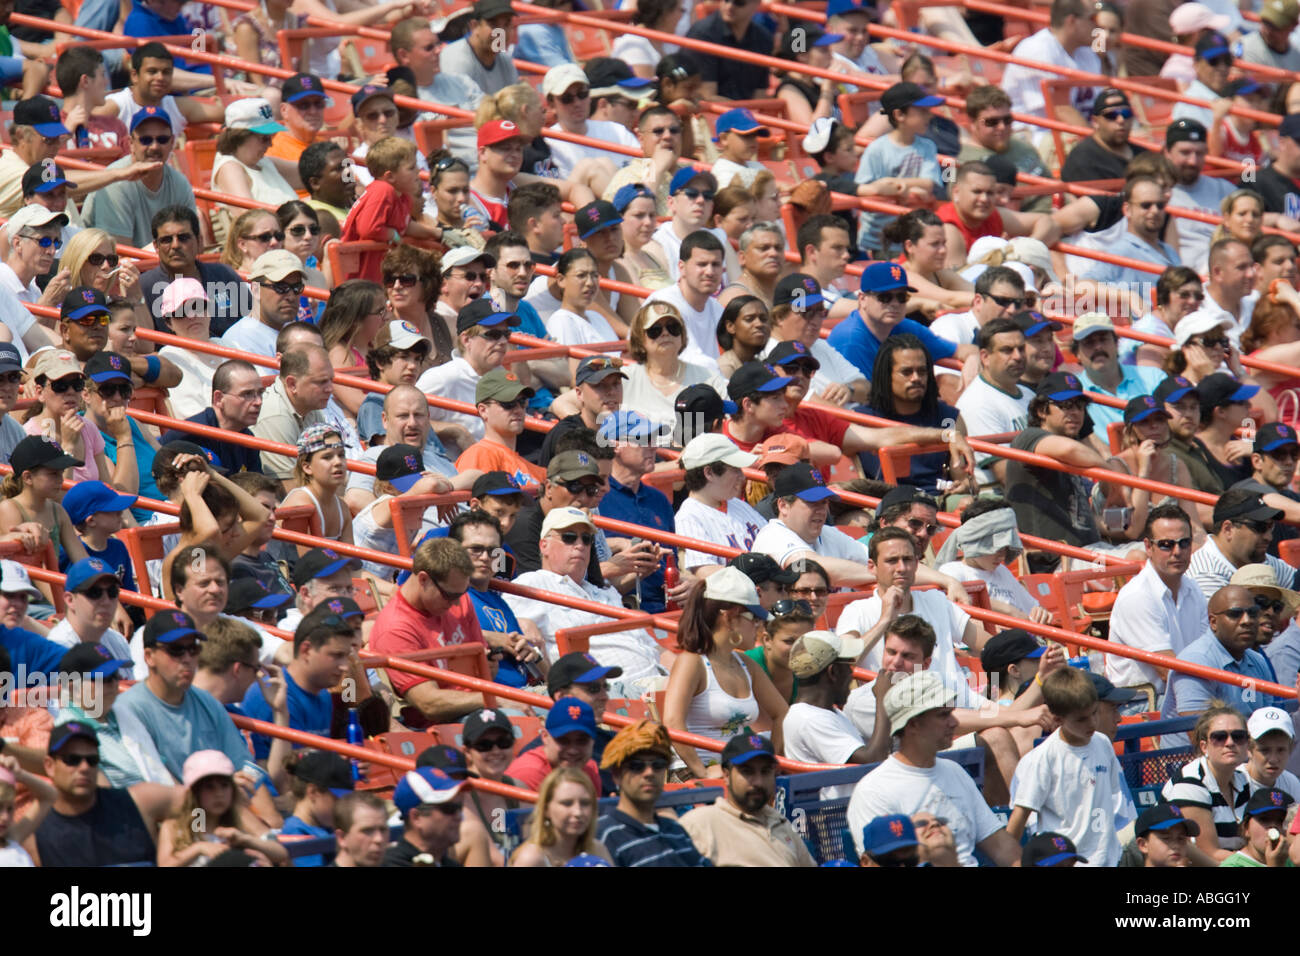 Fans At A Baseball Game ABGG1Y 